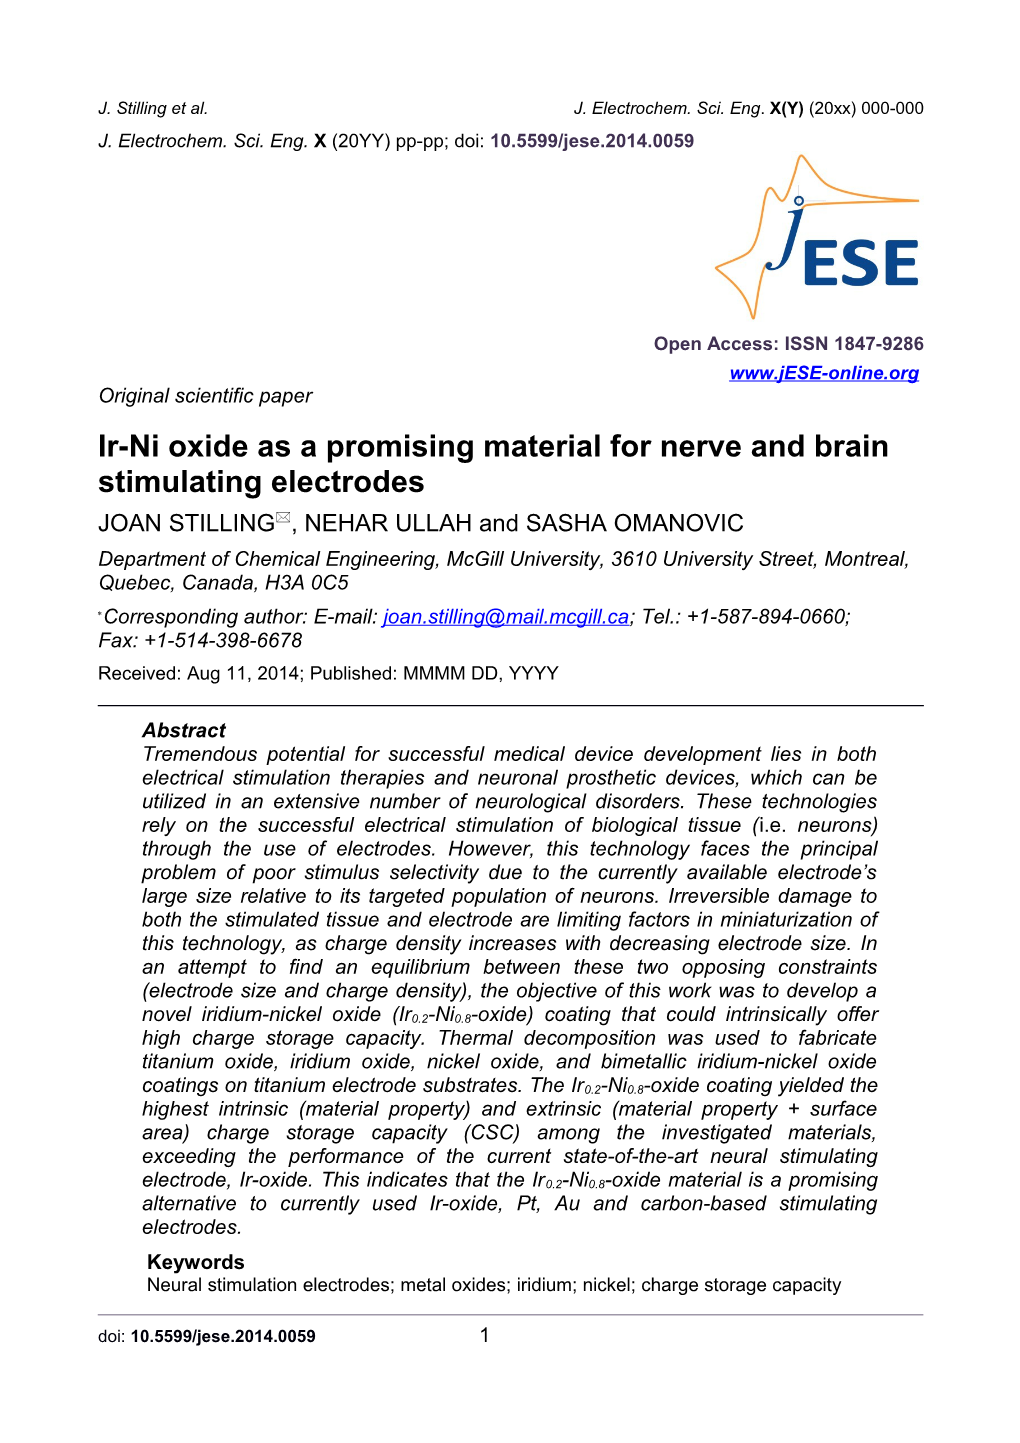 Ir-Ni Oxide As a Promising Material for Nerve and Brain Stimulating Electrodes